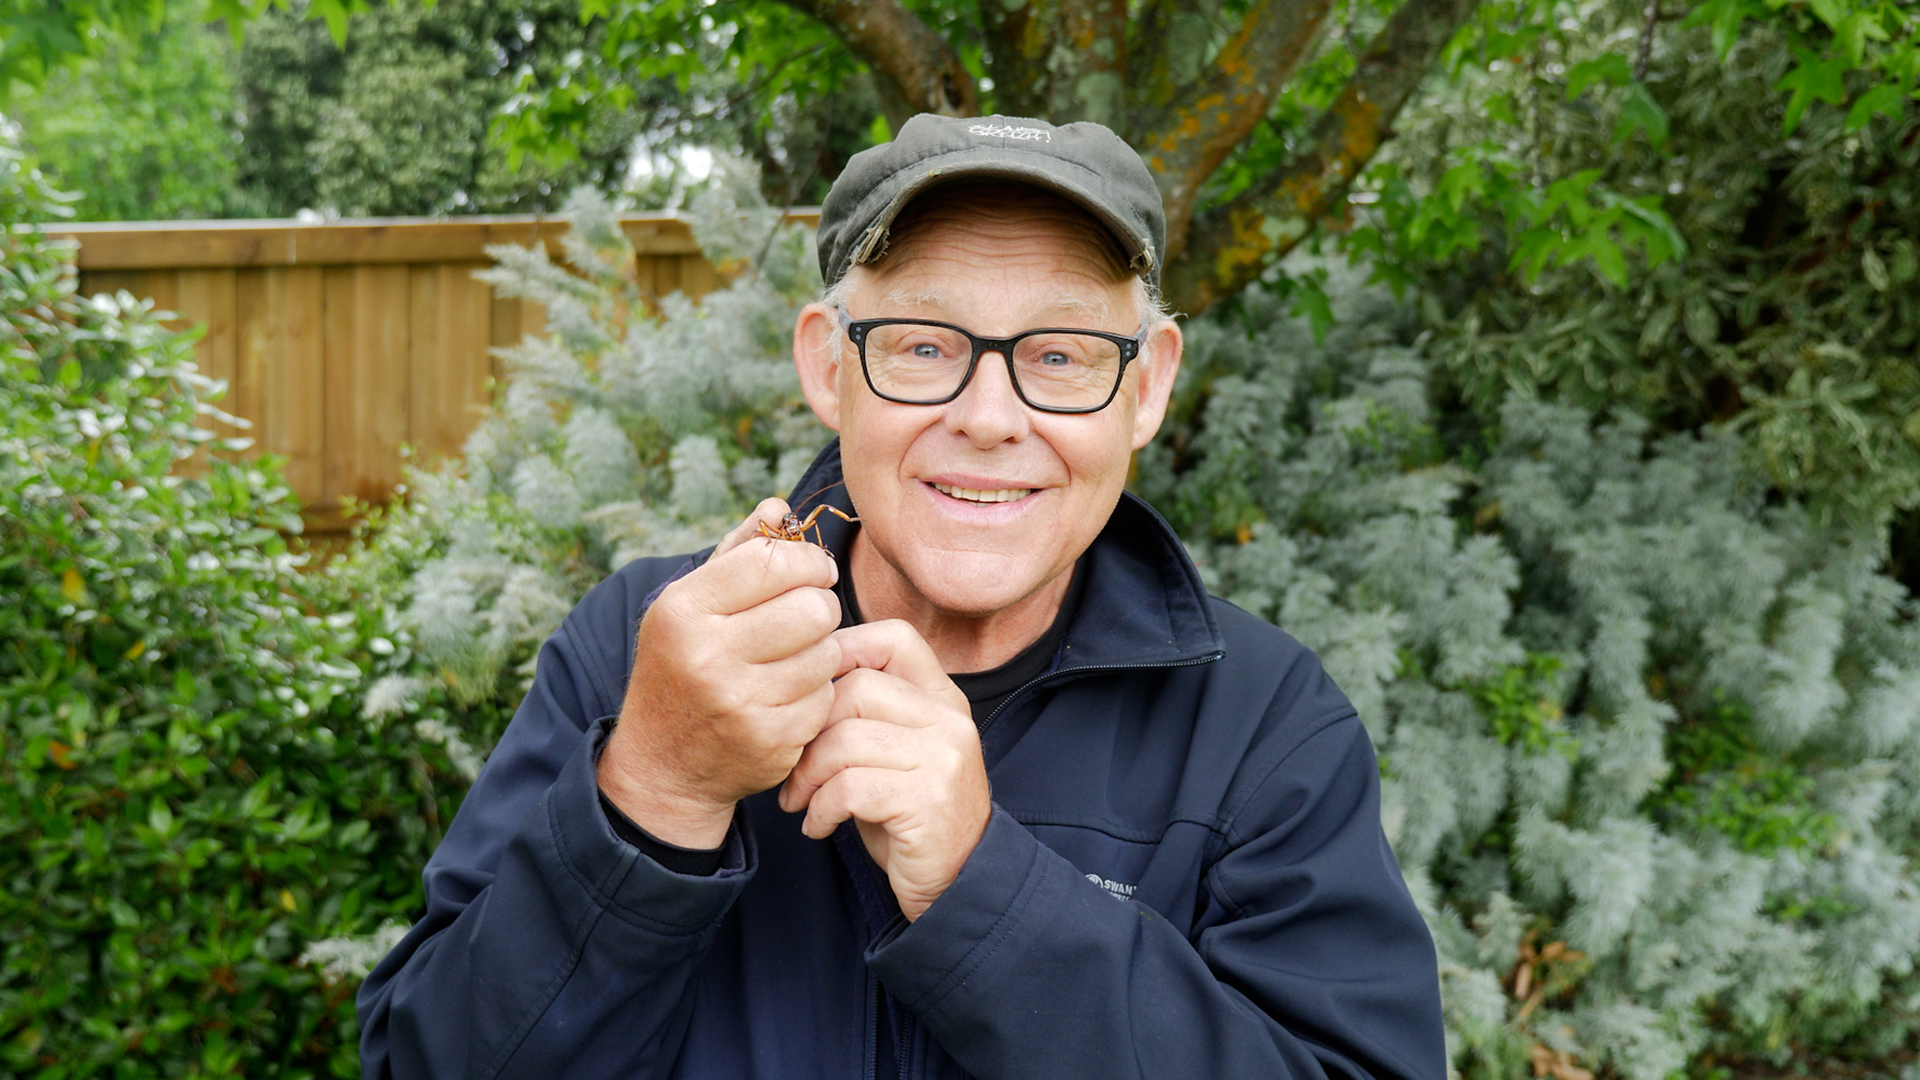 The Bugman, Ruud Kleinpaste smiling and holding a Weta